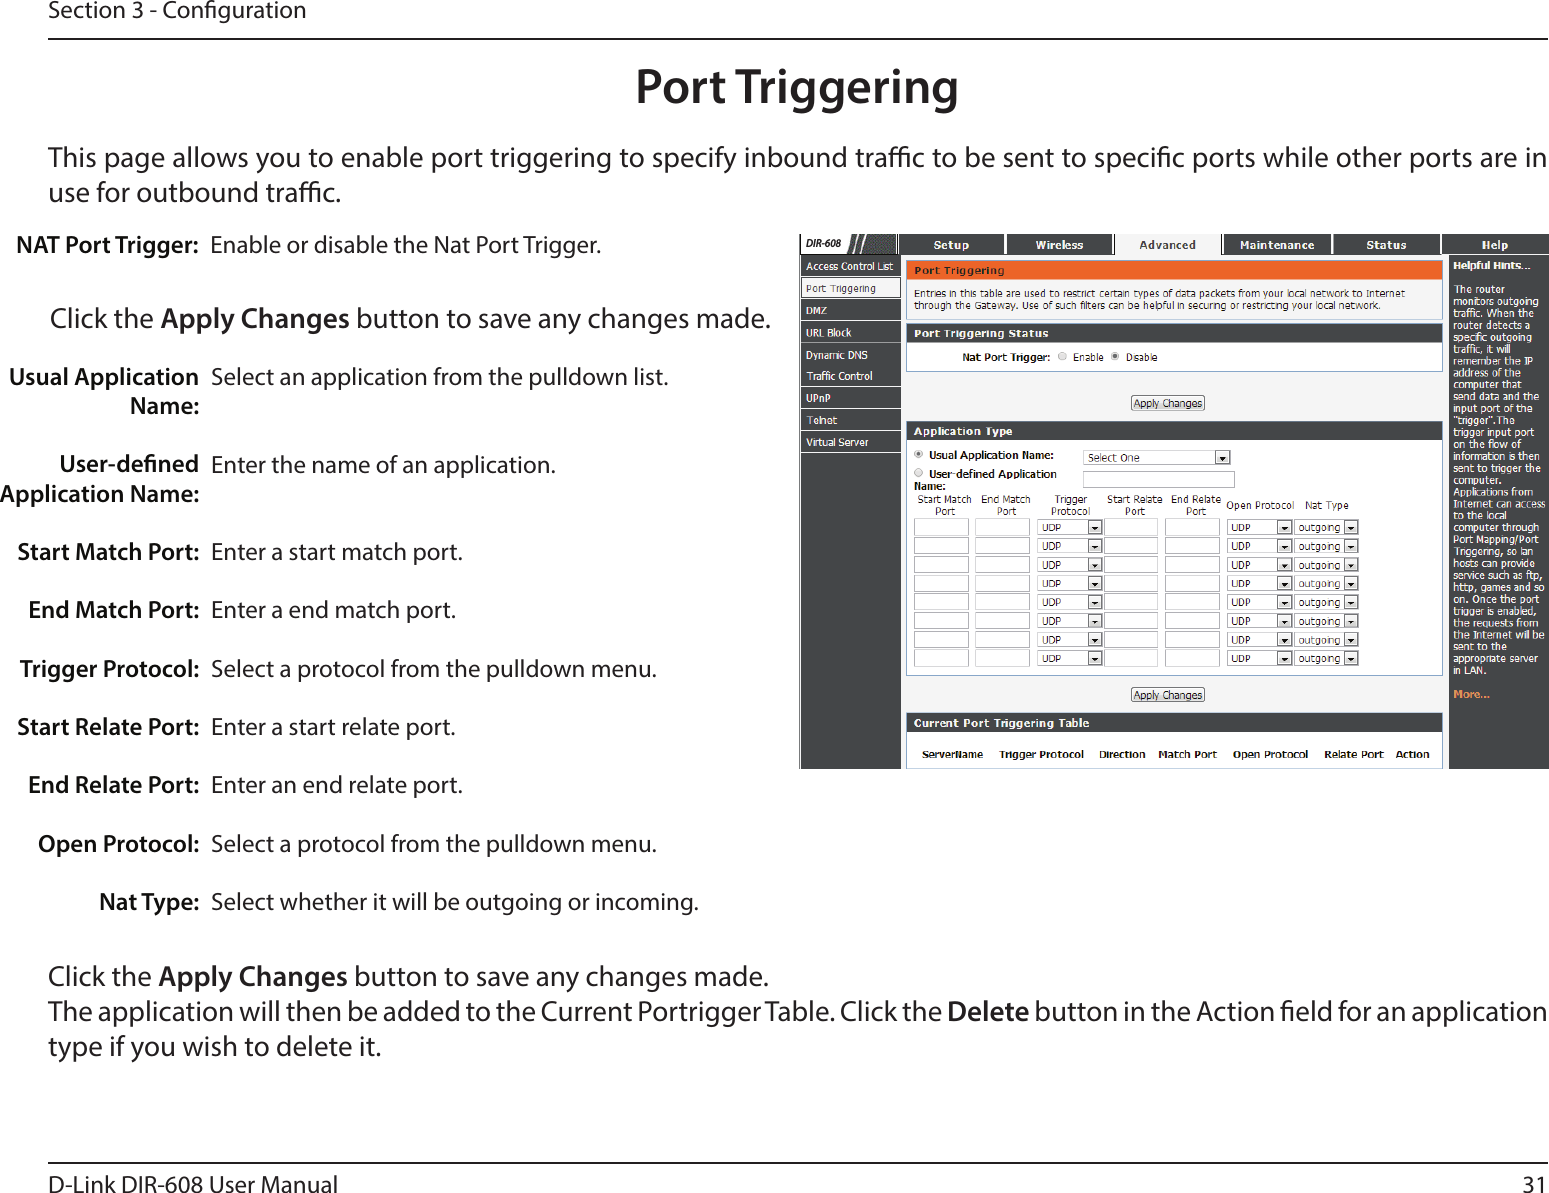 31D-Link DIR-608 User ManualSection 3 - CongurationThis page allows you to enable port triggering to specify inbound trac to be sent to specic ports while other ports are in use for outbound trac.Port TriggeringEnable or disable the Nat Port Trigger.NAT Port Trigger:Click the Apply Changes button to save any changes made.Select an application from the pulldown list.Enter the name of an application.Enter a start match port.Enter a end match port.Select a protocol from the pulldown menu.Enter a start relate port.Enter an end relate port.Select a protocol from the pulldown menu.Select whether it will be outgoing or incoming. Usual Application Name:User-dened Application Name:Start Match Port:End Match Port:Trigger Protocol:Start Relate Port:End Relate Port:Open Protocol:Nat Type:Click the Apply Changes button to save any changes made. The application will then be added to the Current Portrigger Table. Click the Delete button in the Action eld for an application type if you wish to delete it.DIR-608